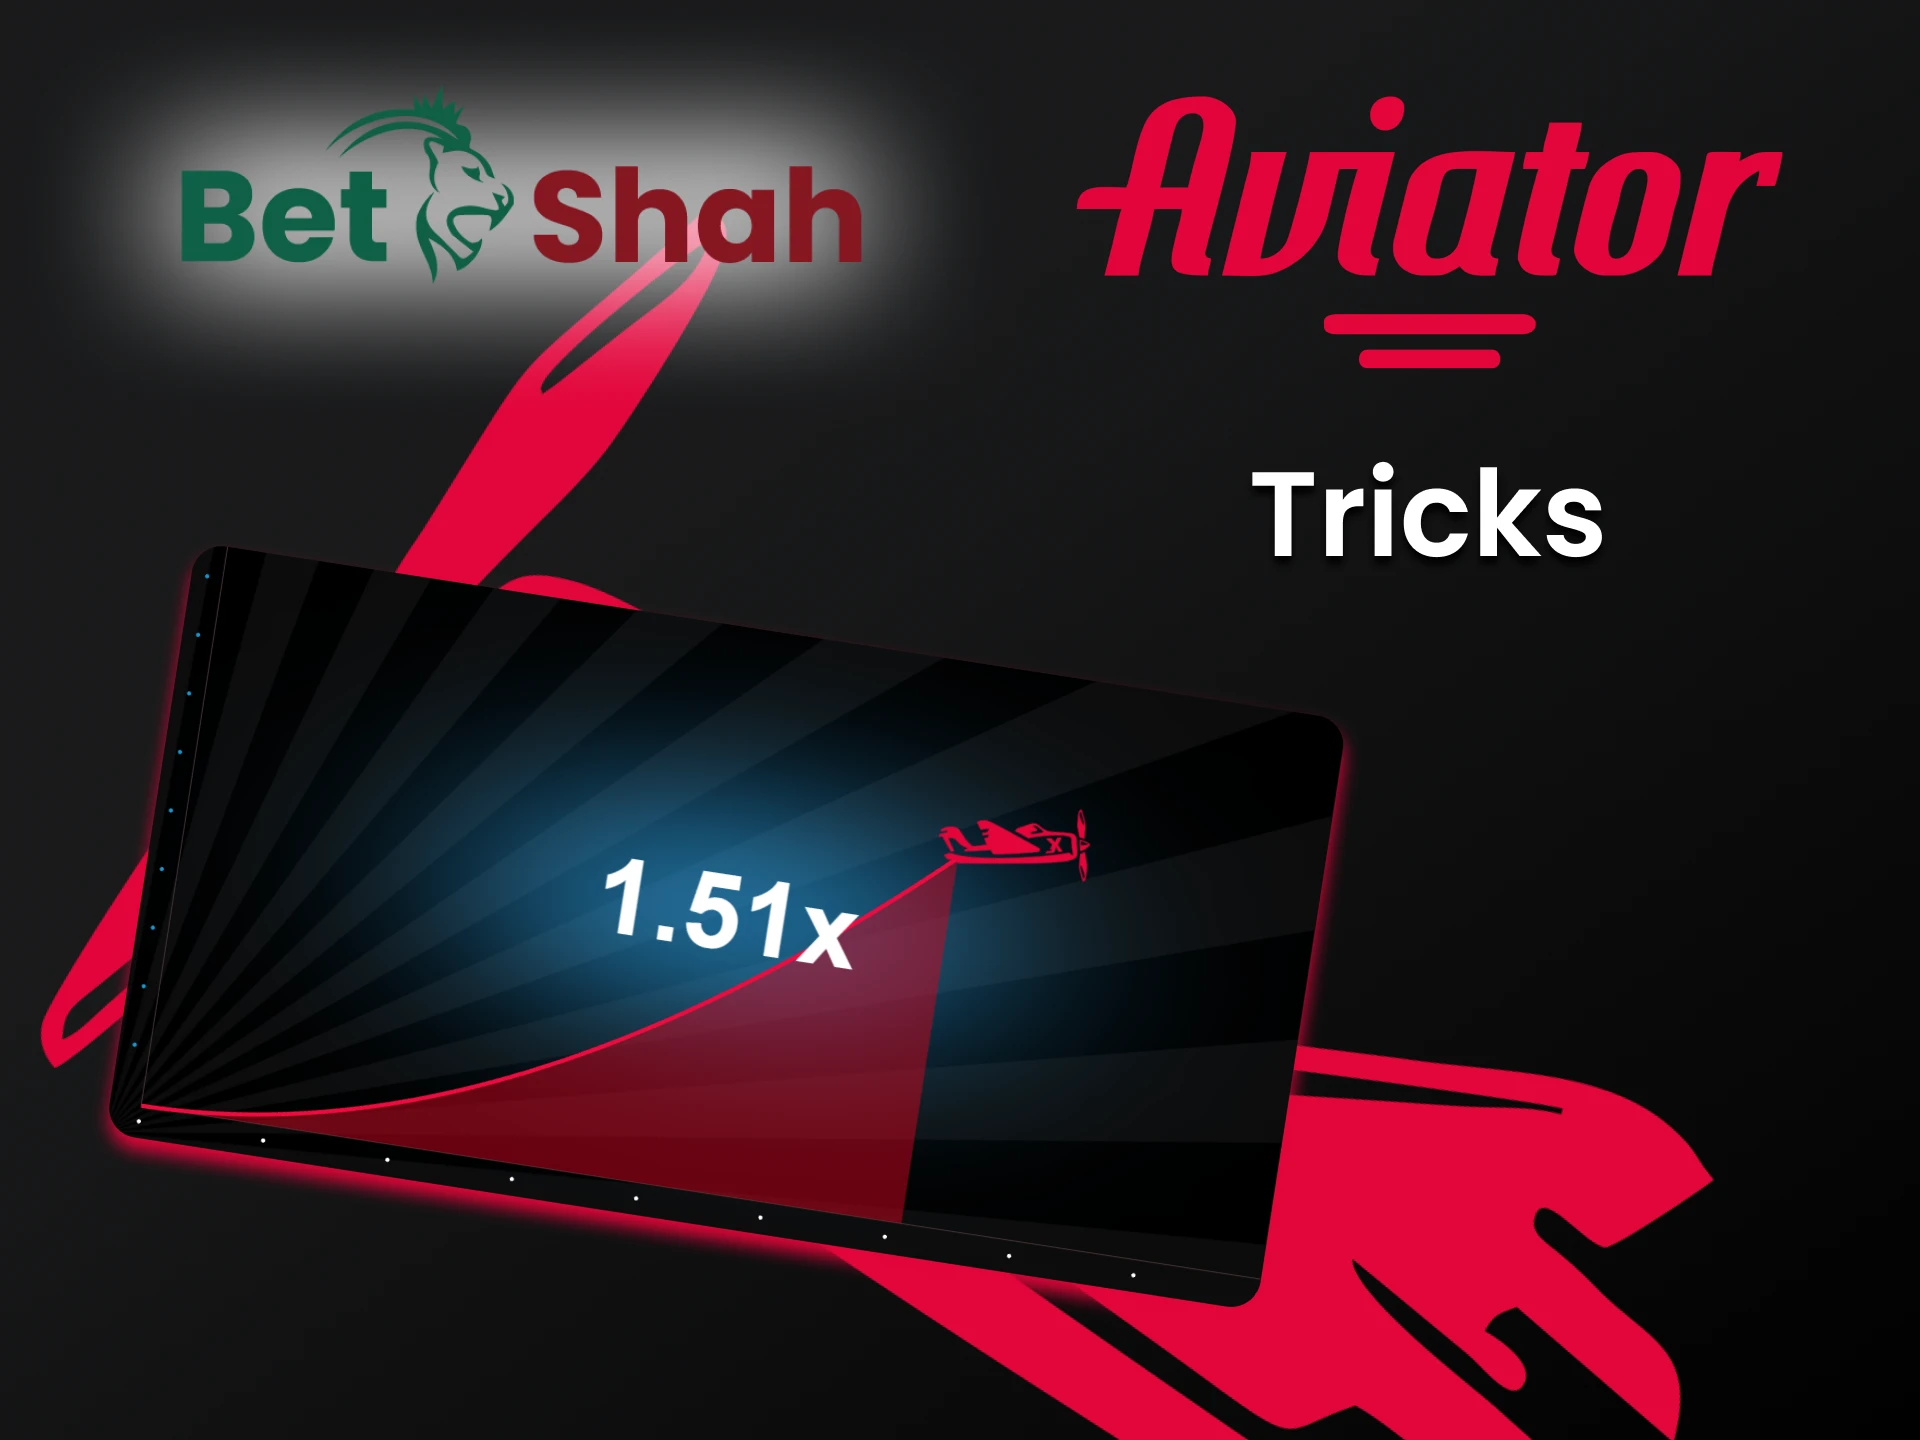 Learn tricks and strategies to win at Aviator at BetShah.